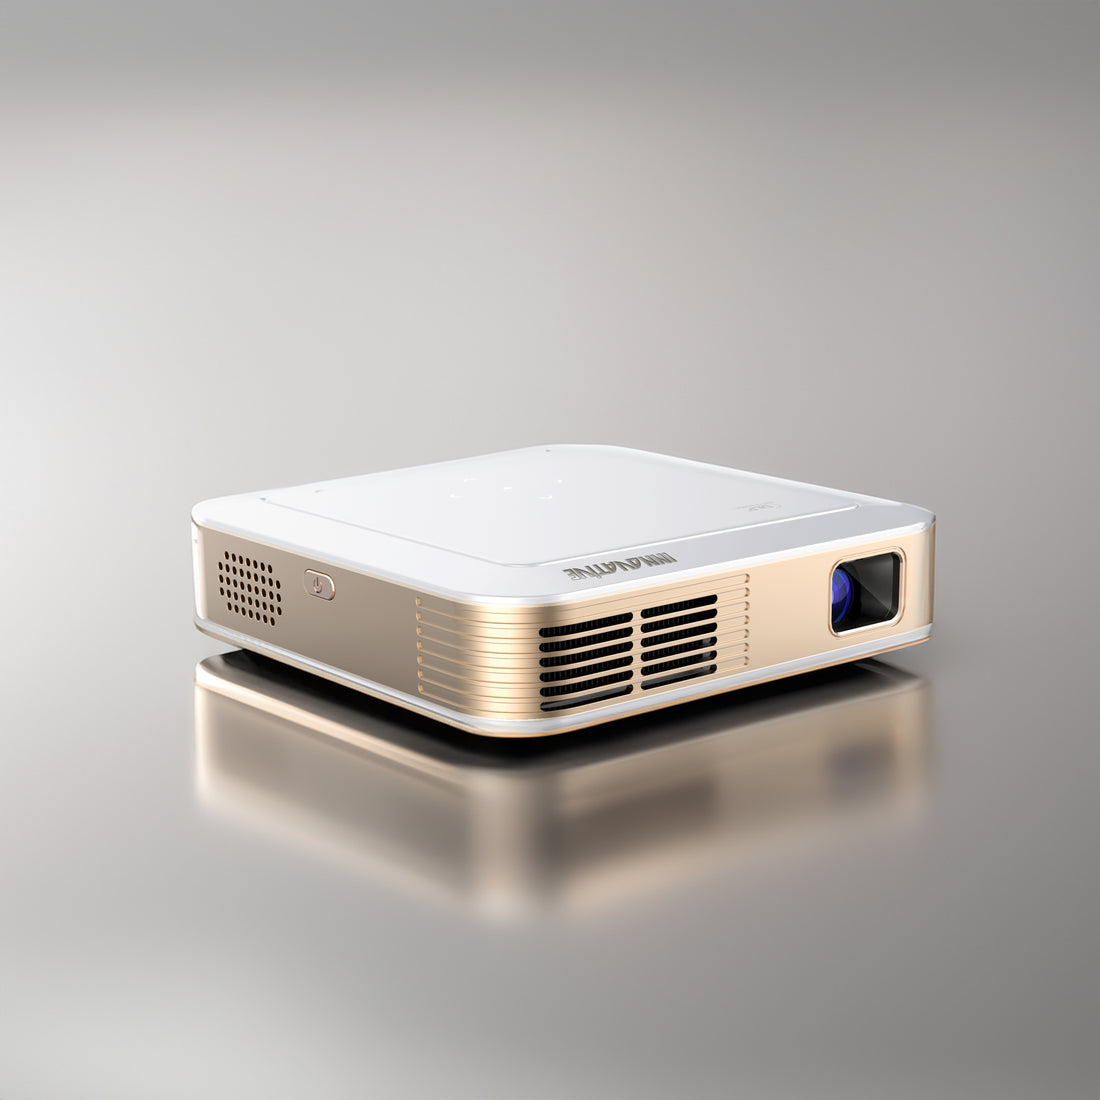 Best Battery Projector ever, small, ultra sharp and madly bright - K7x Type-C PD Smart 4k